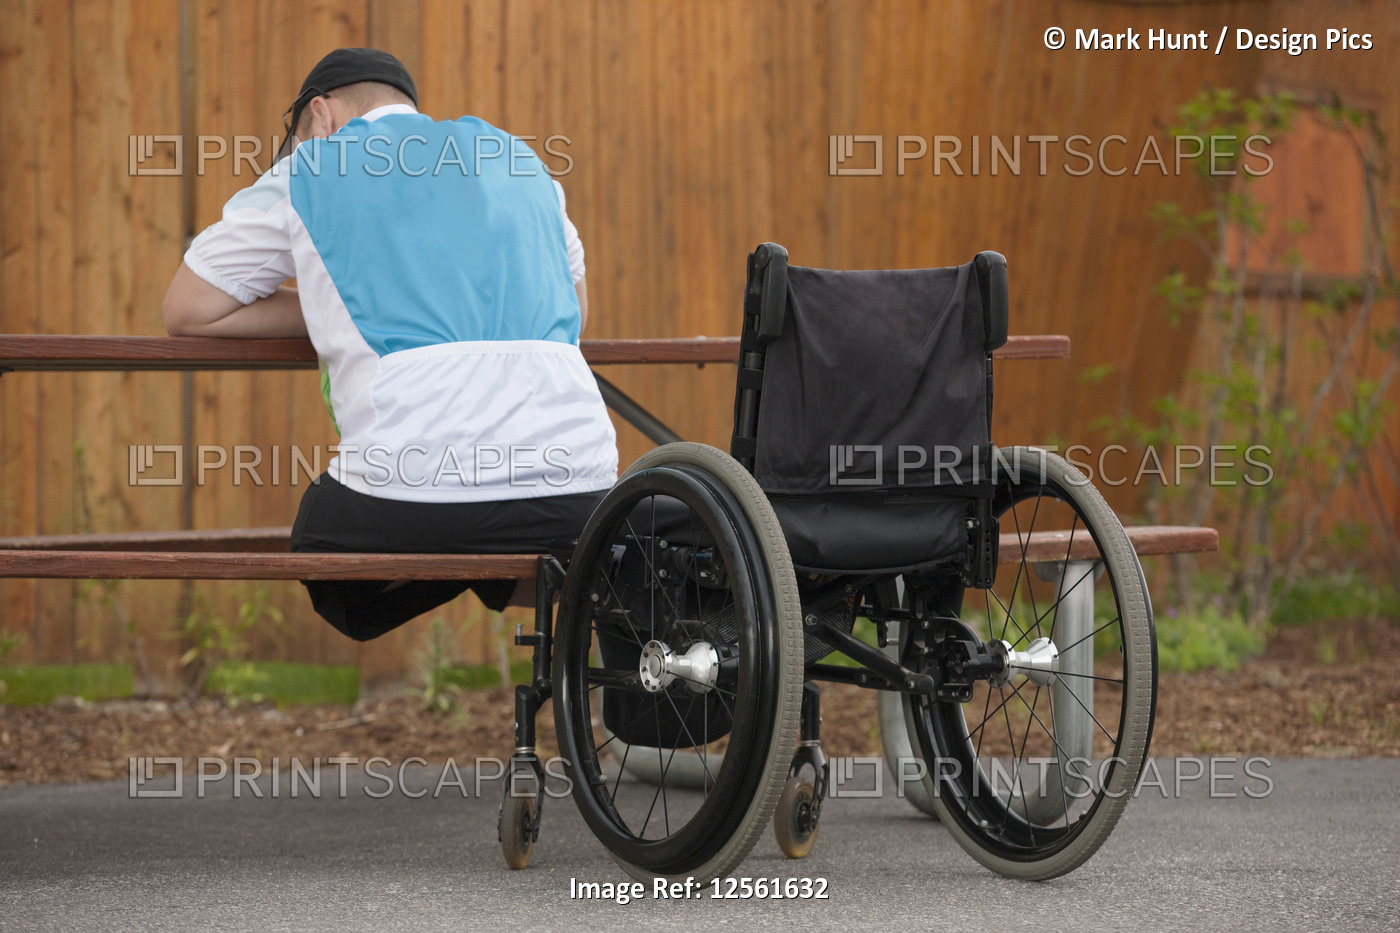 Man with leg amputee preparing for a race